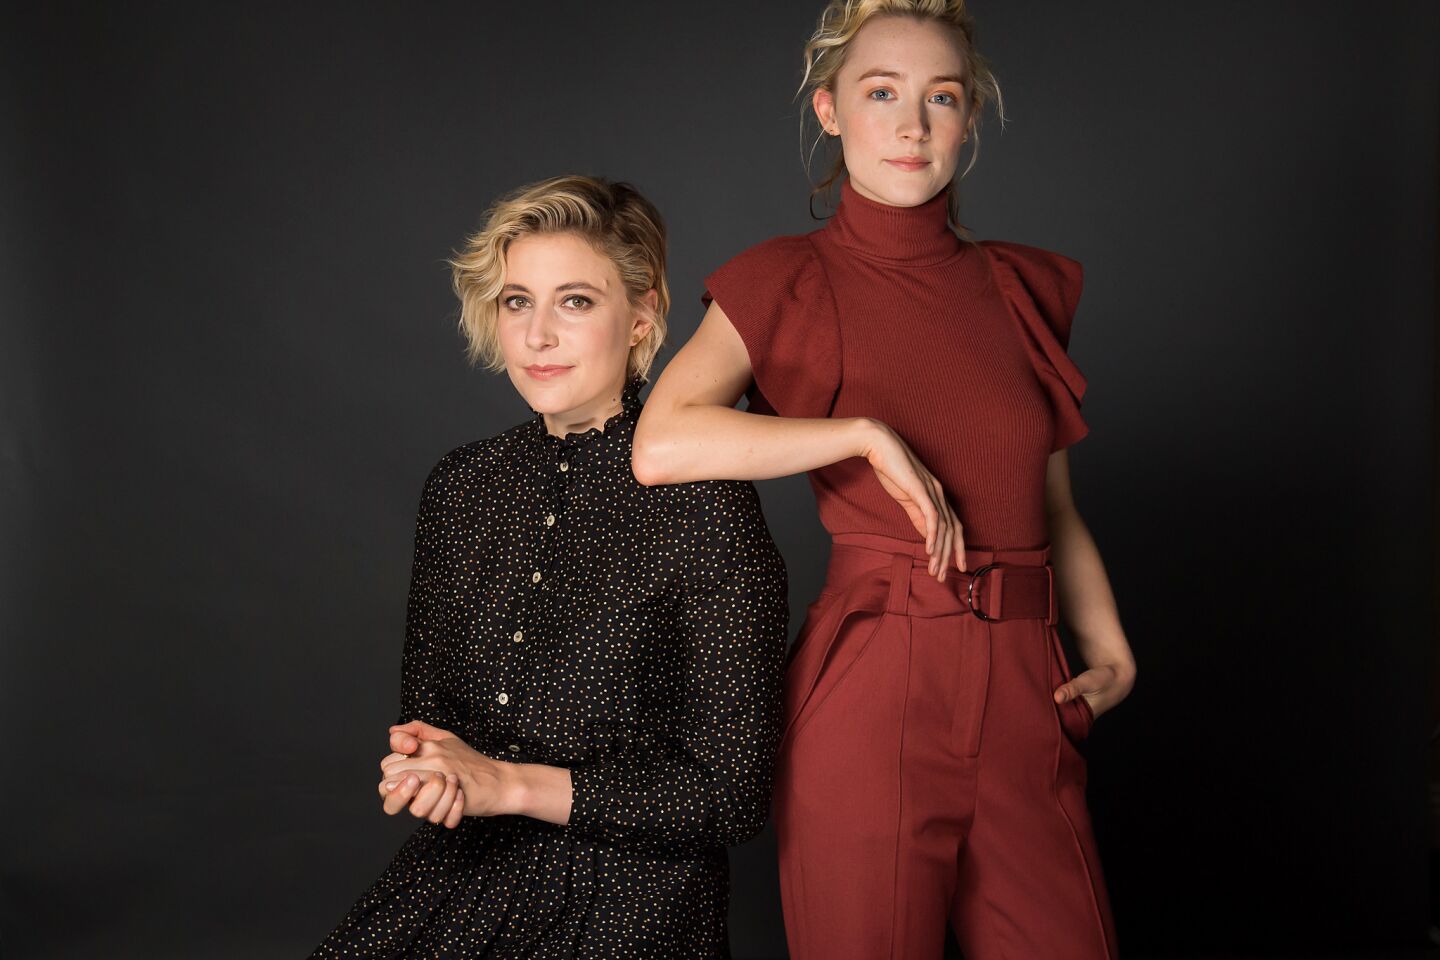 Celebrity portraits by The Times | Greta Gerwig and Saoirse Ronan